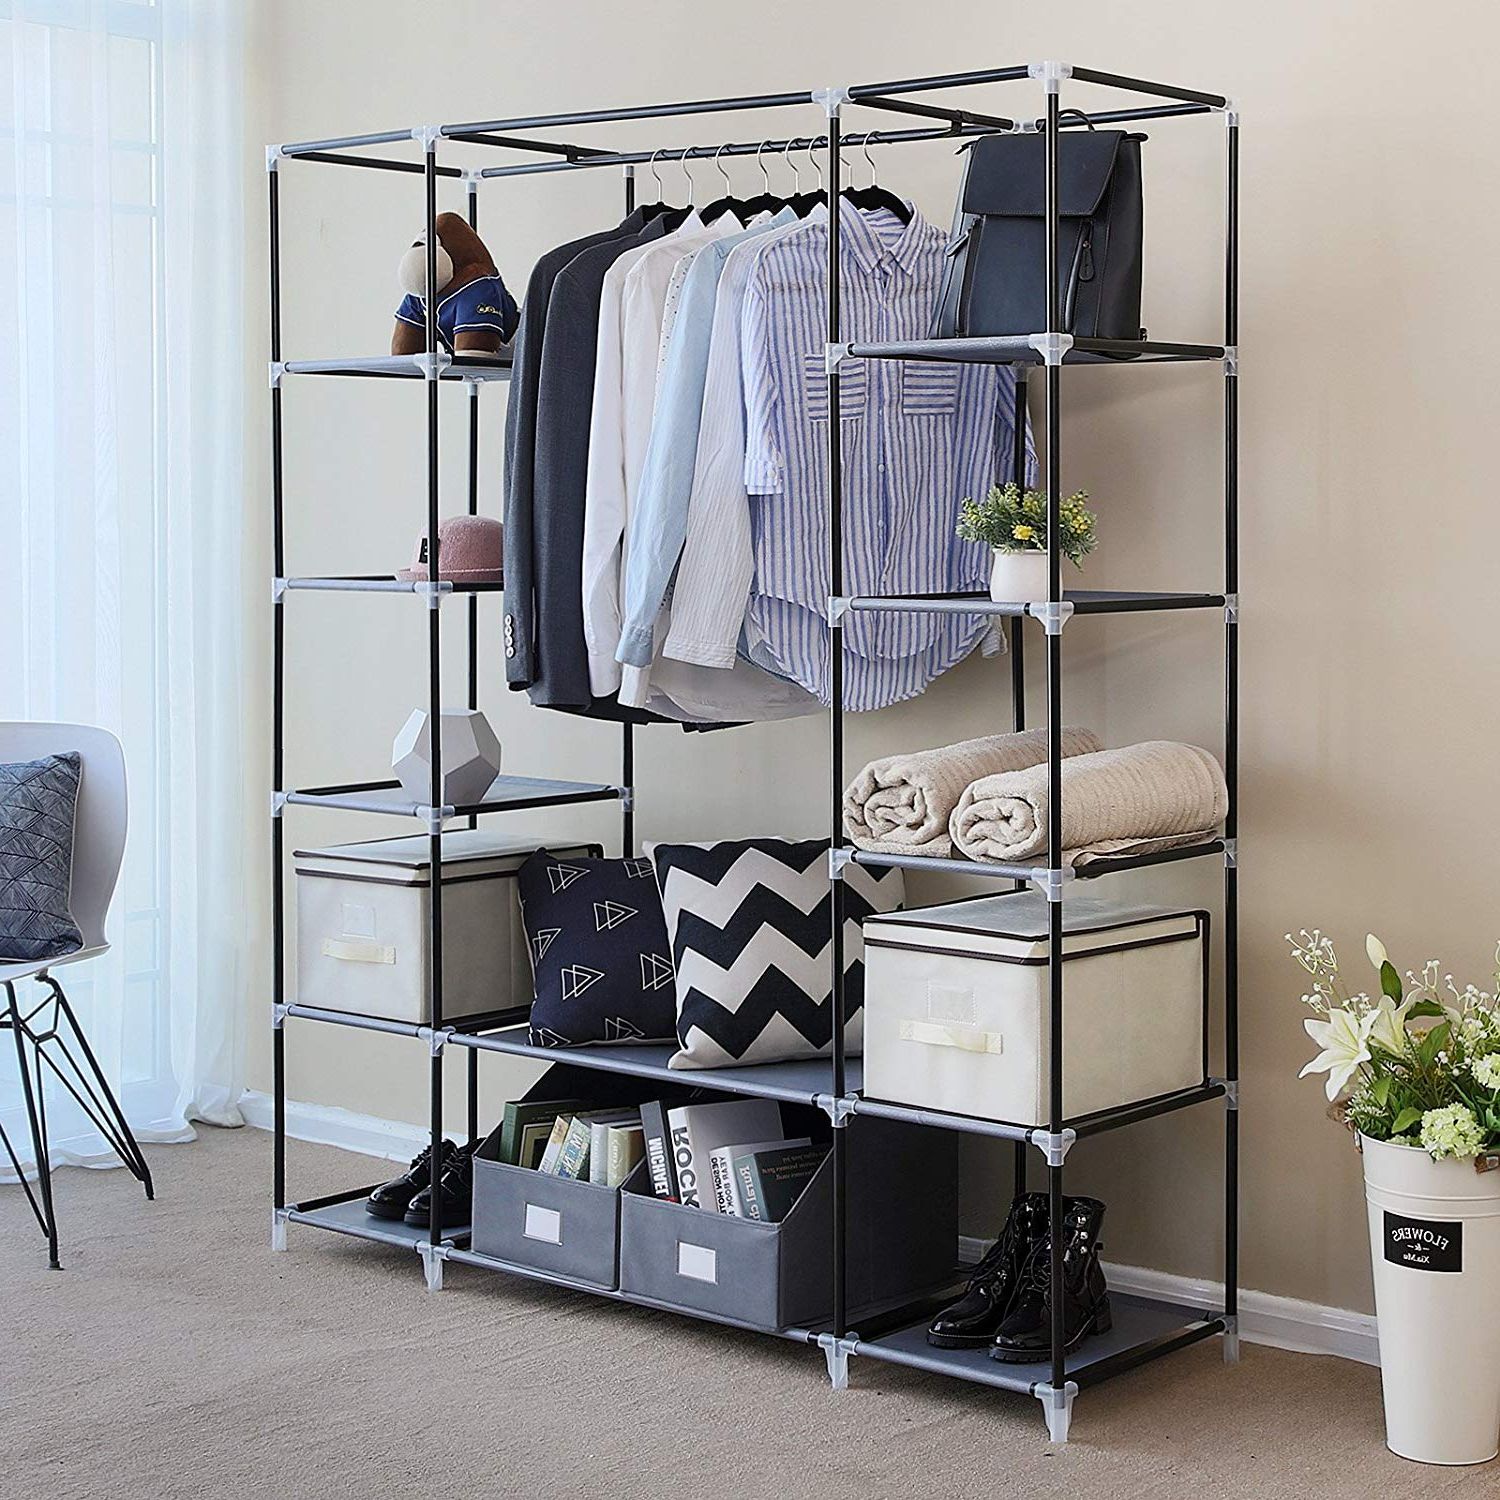 20 Portable Closet Choices For Easy Set Up And Cleaning | Storables Inside Portable Wardrobes (View 14 of 20)